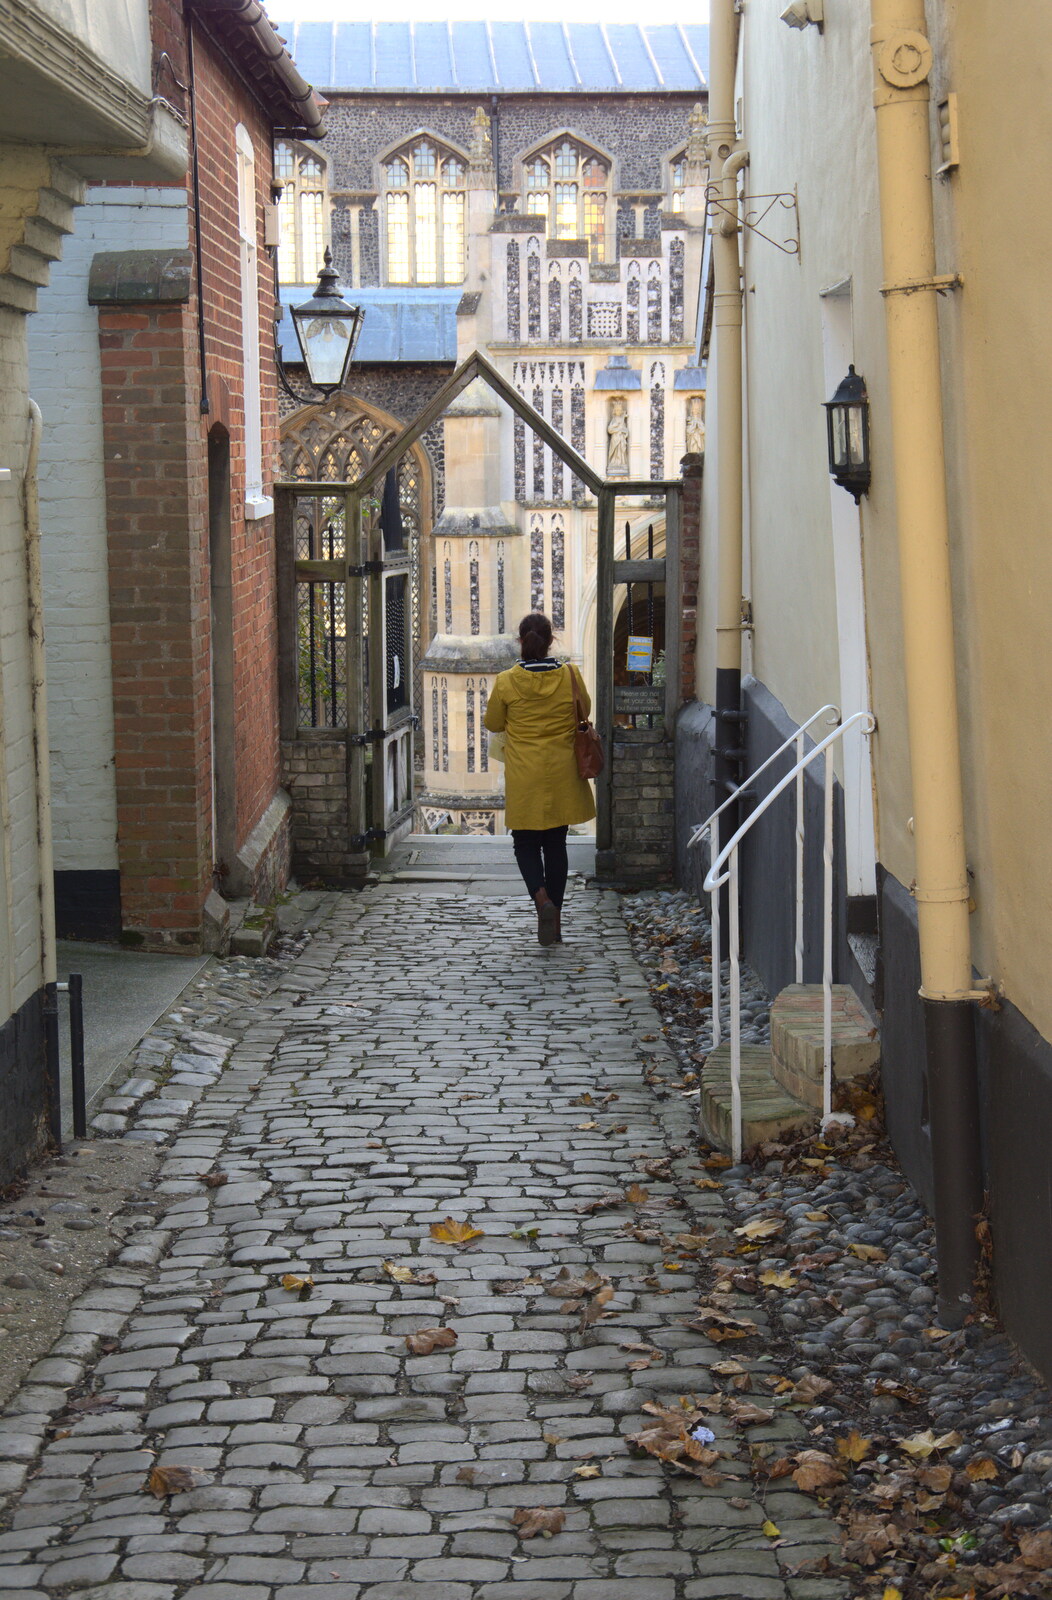 Cobbled street back to the church from Isobel's Birthday, Woodbridge, Suffolk - 2nd November 2020